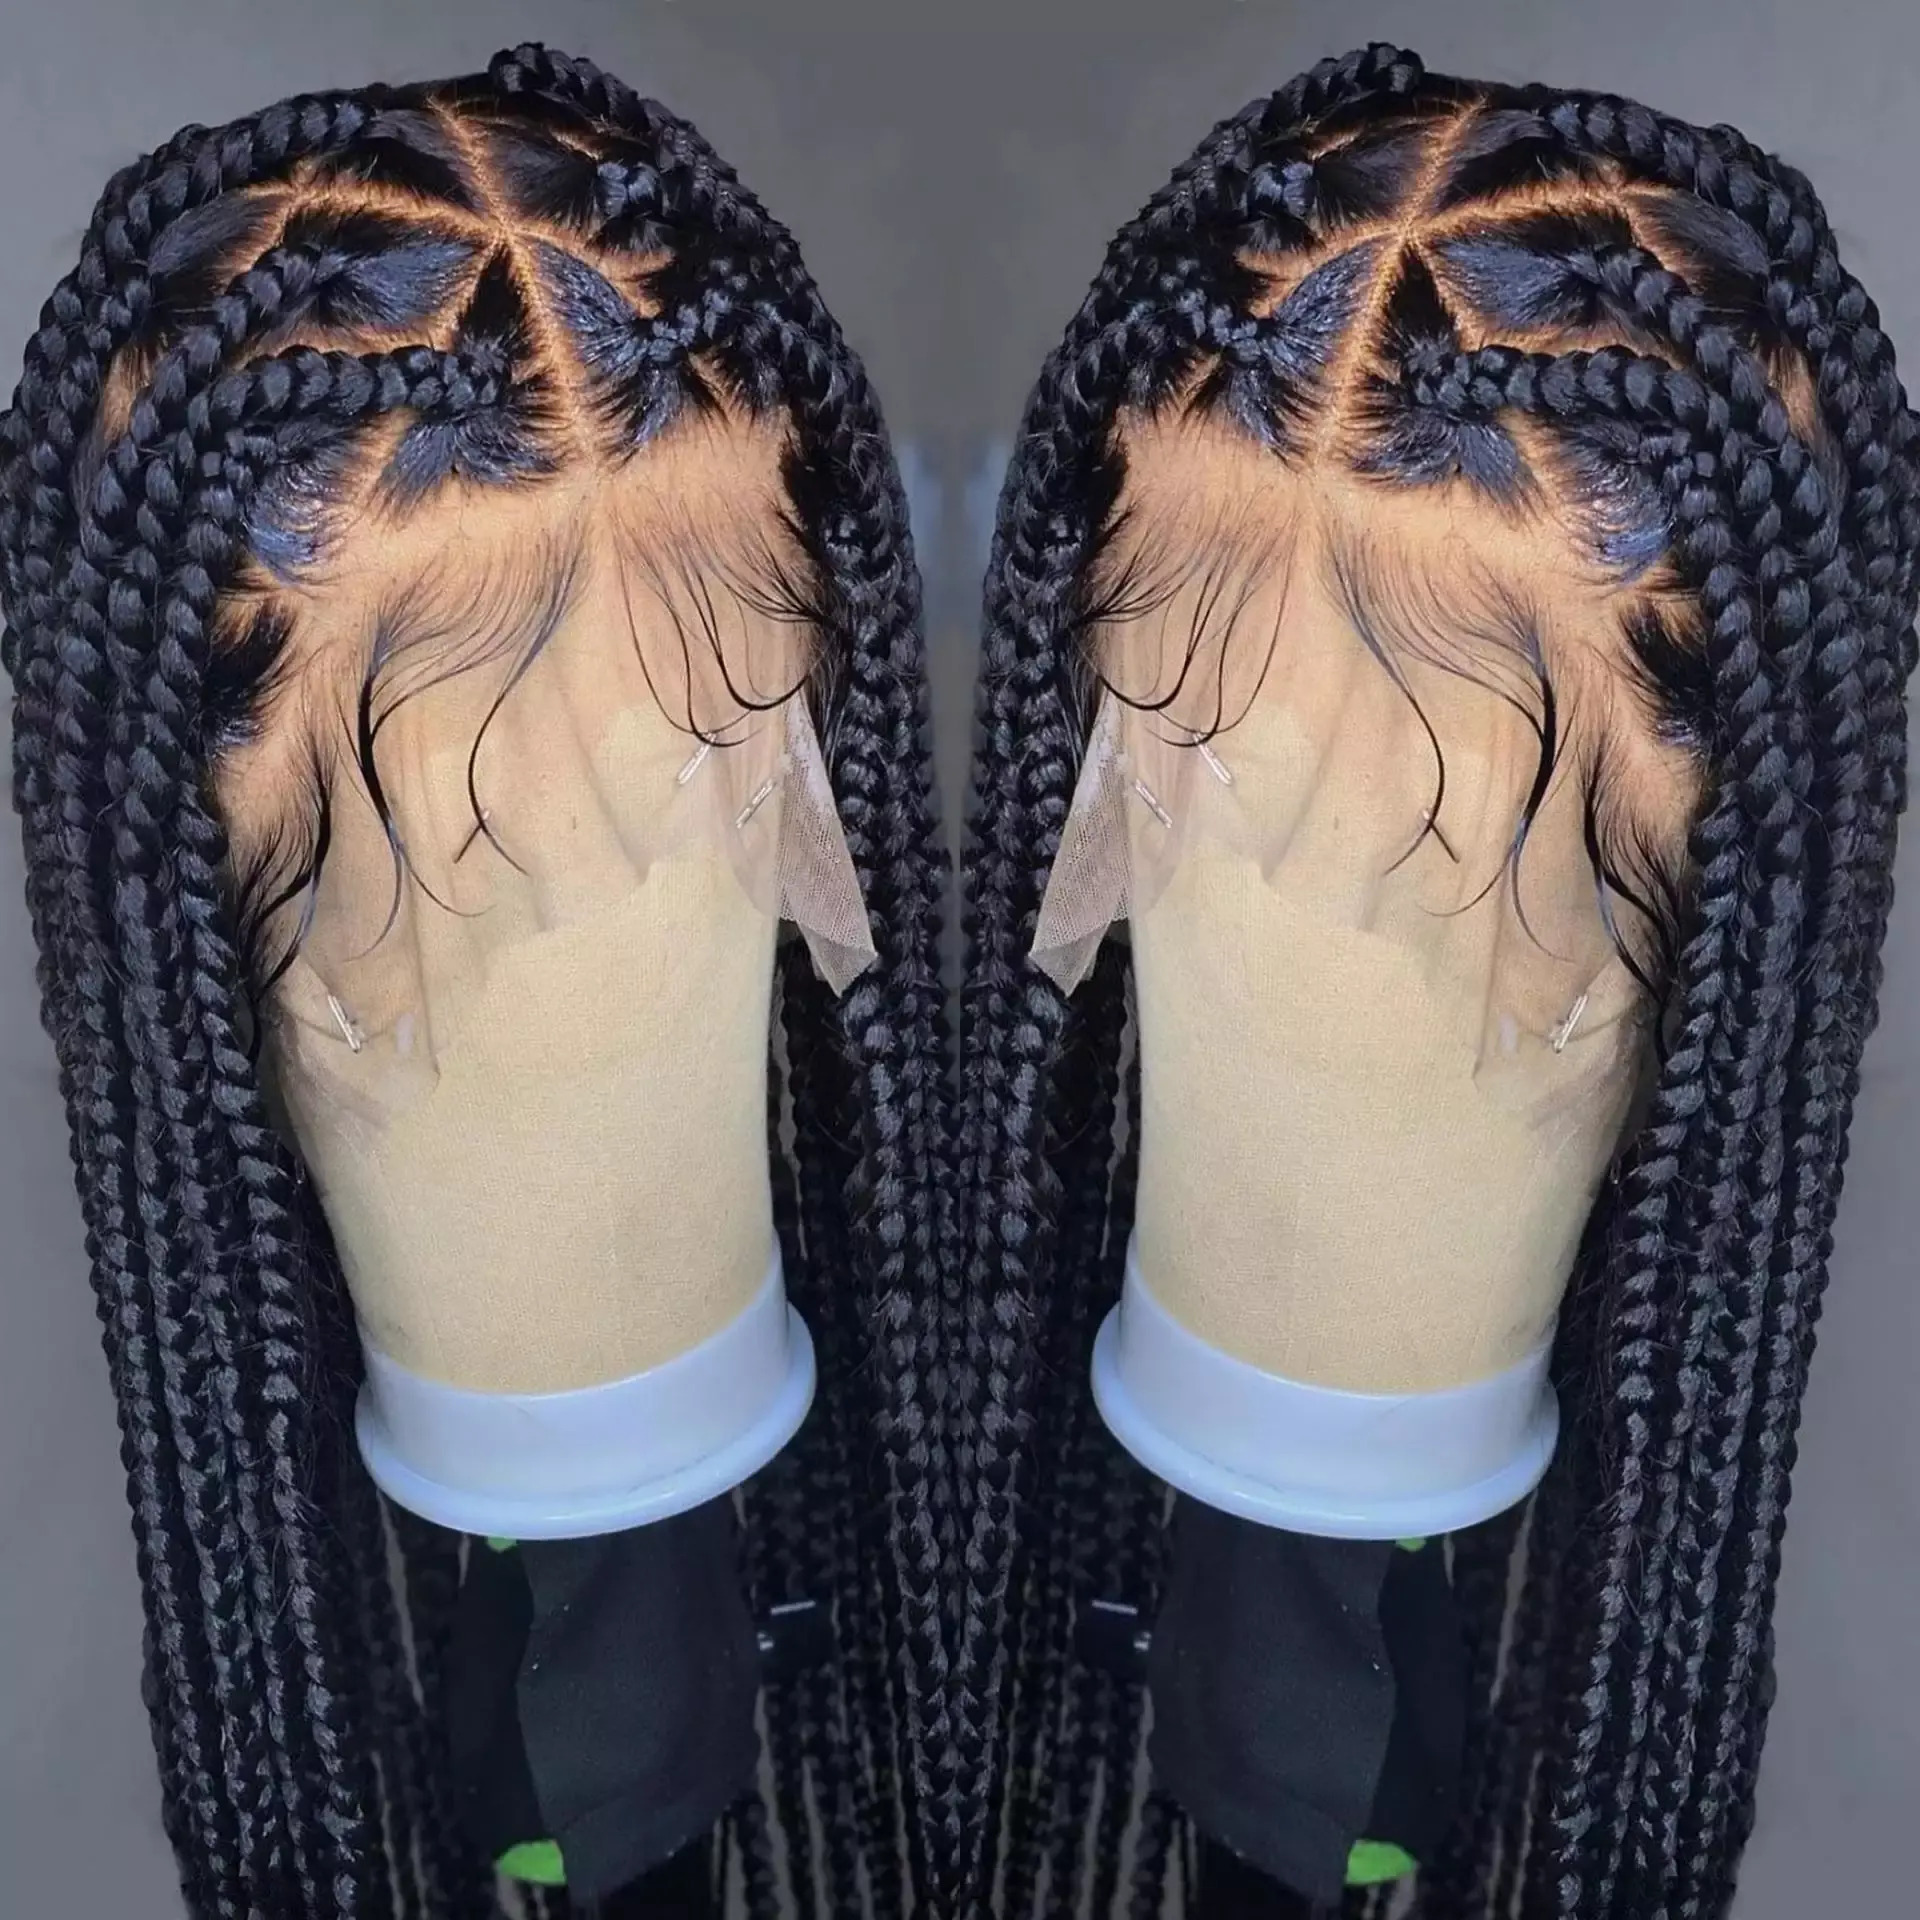 Wholesale Transparent Lace Braided Wigs Different Styles Human Hair Hd 360 Full Lace Braided Wigs For Black Women Lace Front